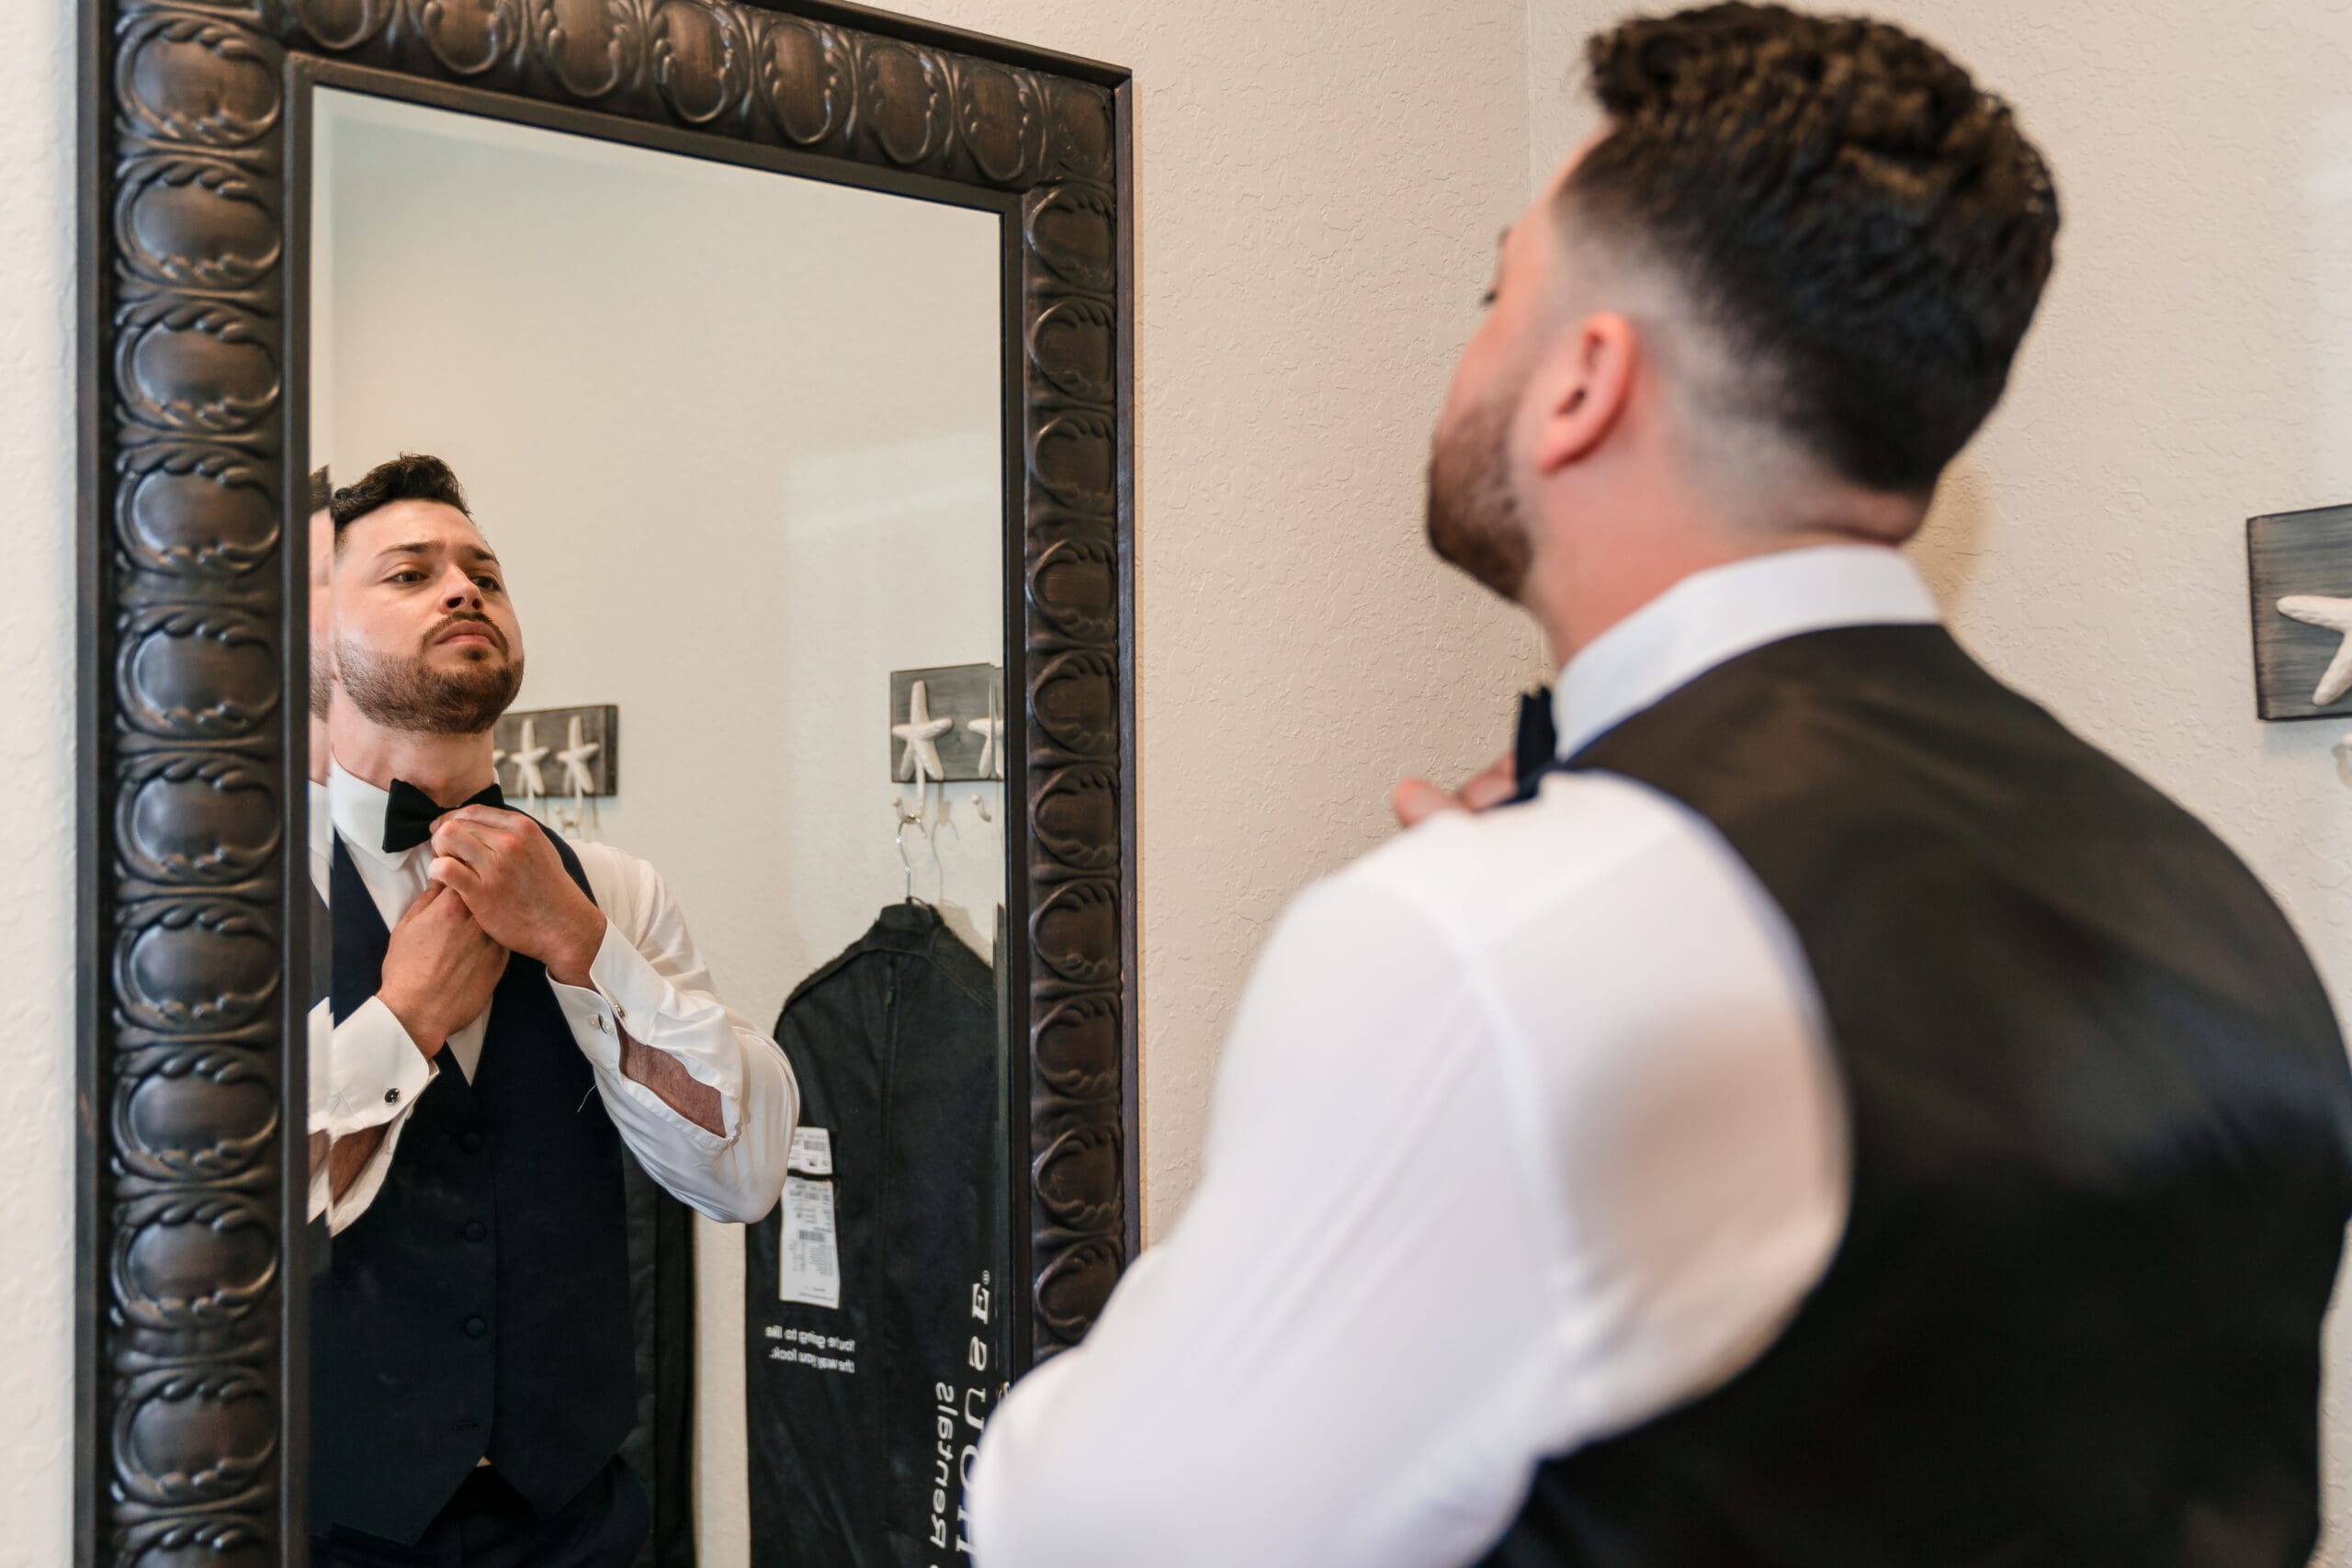 Jazer adjusting his tie in the mirror in black and white.